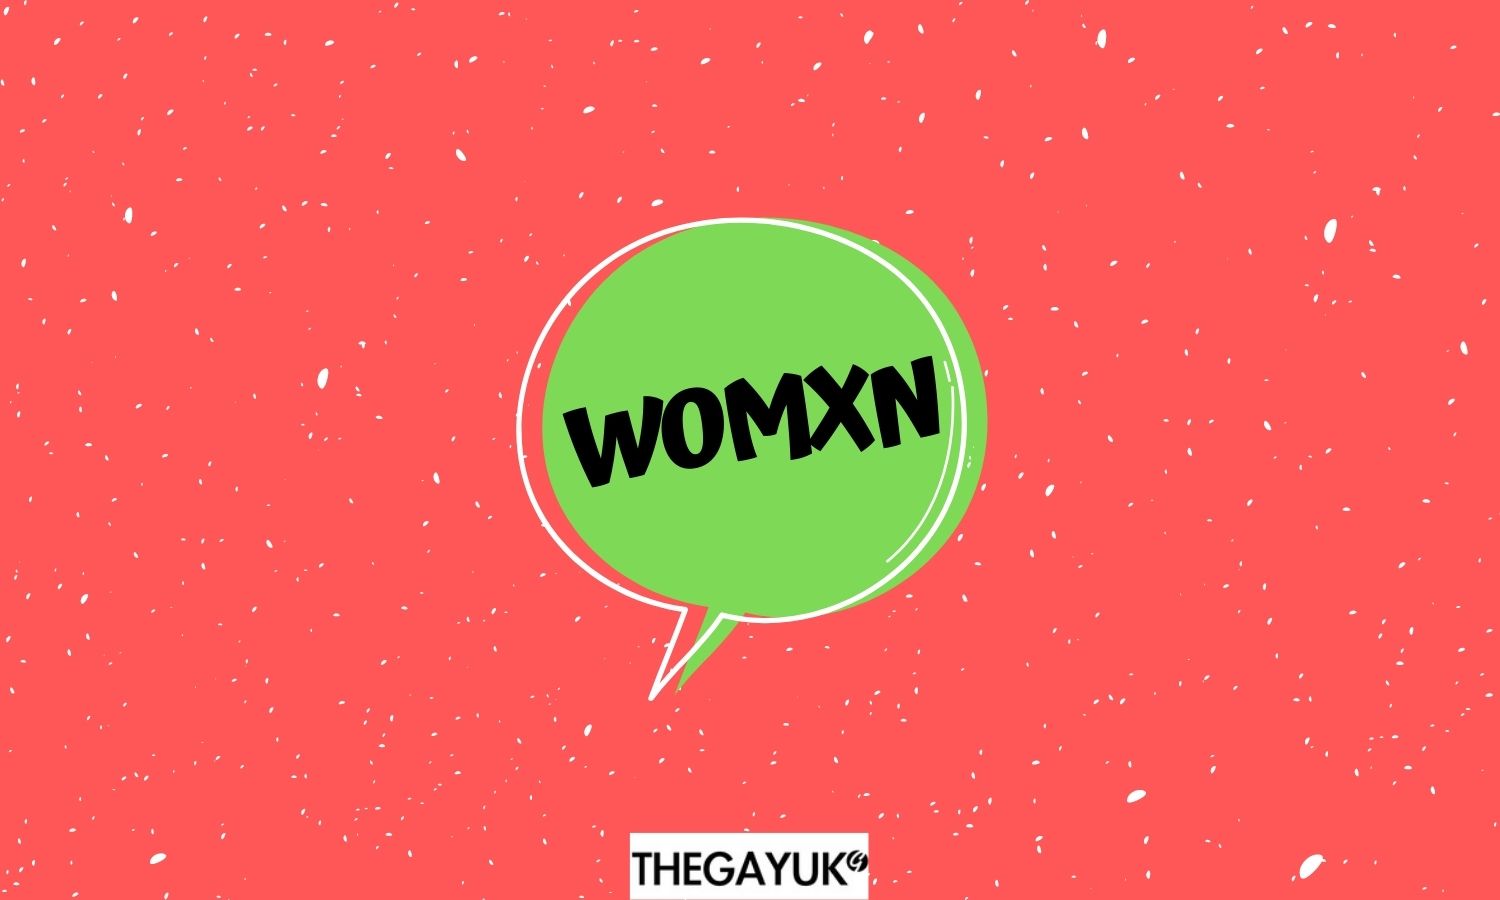 Does Alison Moyet make a good point about the word “Womxn”?